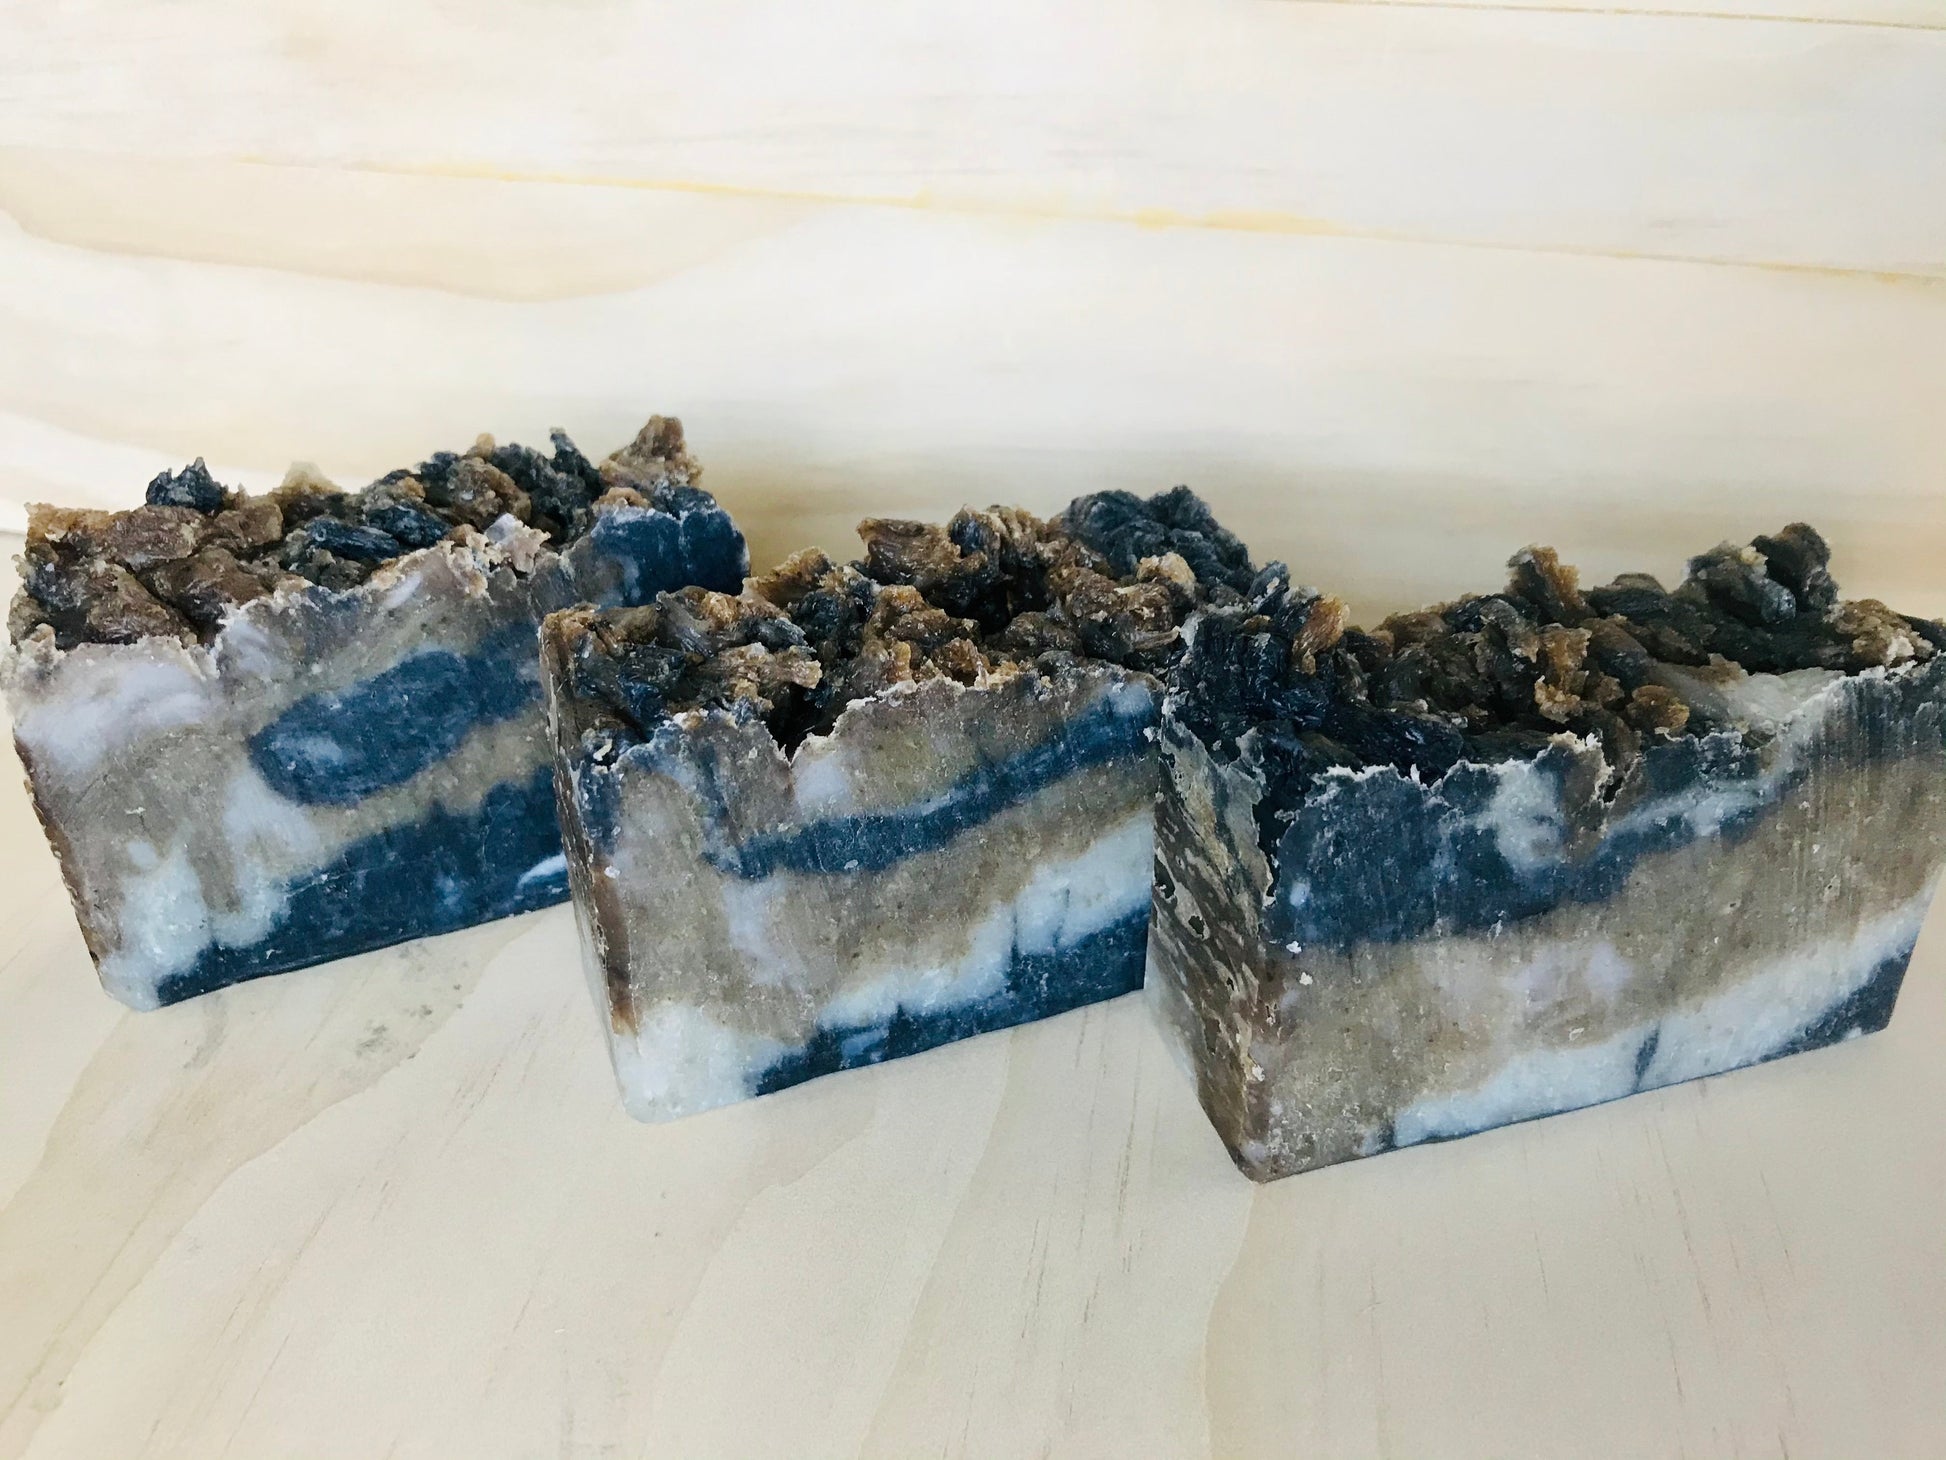 Detox Clay Soap - for Oily & Acne Prone Skin, Effervesce.ItsJustBubbles, Cosmetic Soap, detox-clay-face-soap-for-oily-to-normal-skin-3oz, acne, activated charcoal, bentonite clay, body, detox